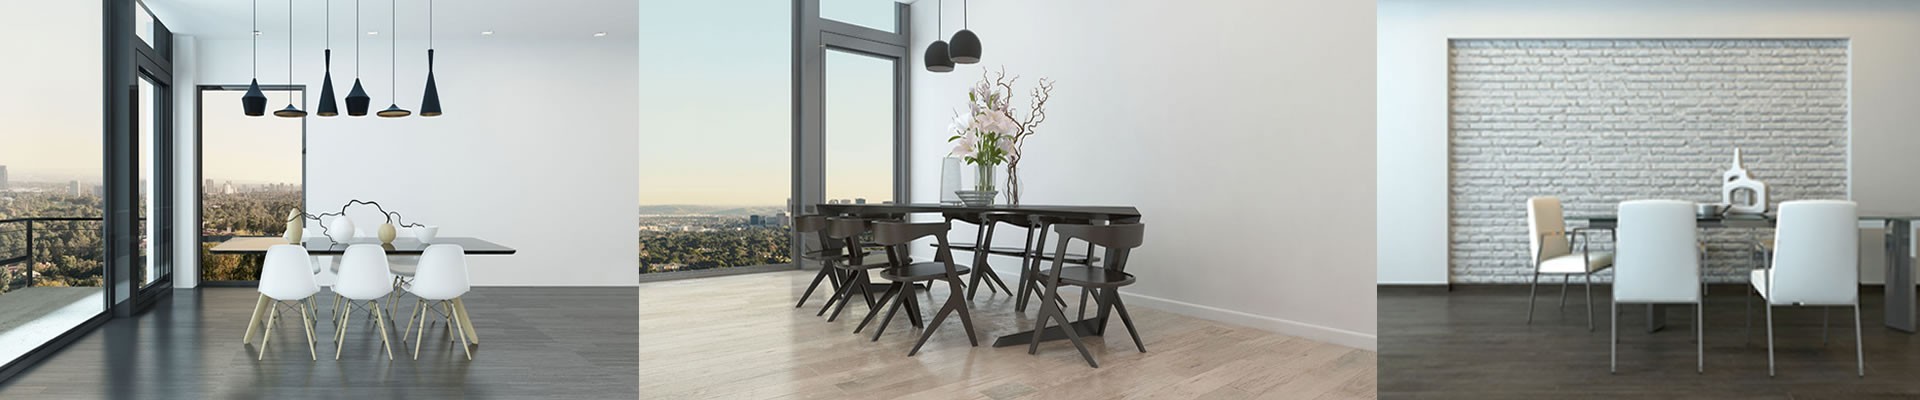 Dining Room | Dining Chairs, Tables & Furniture